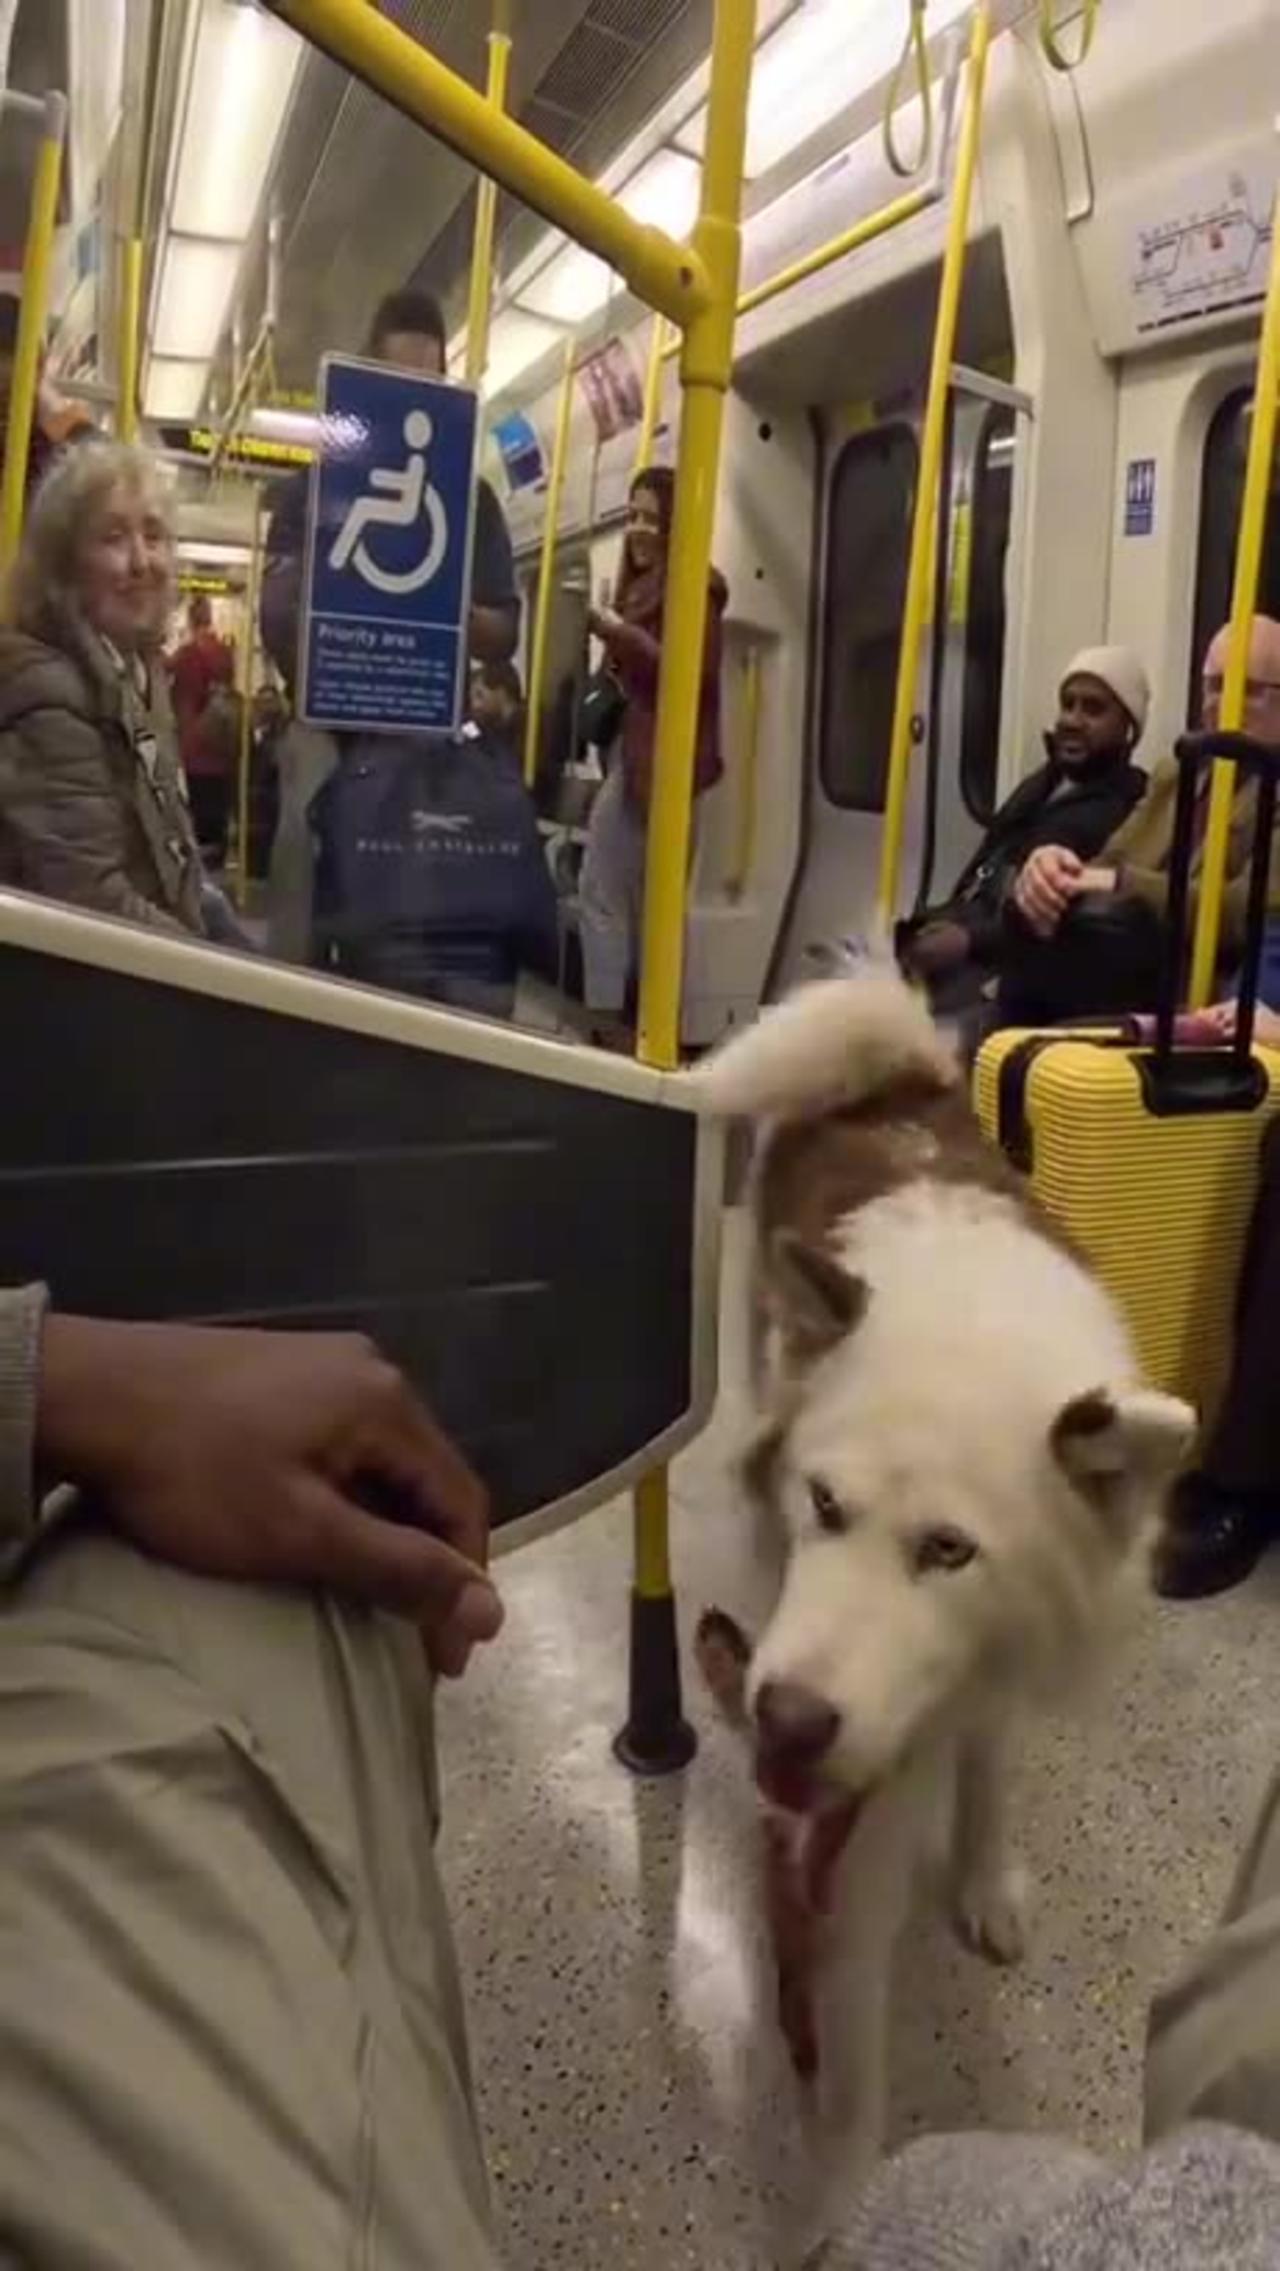 Would it make you happy, if you met this dog on the train?